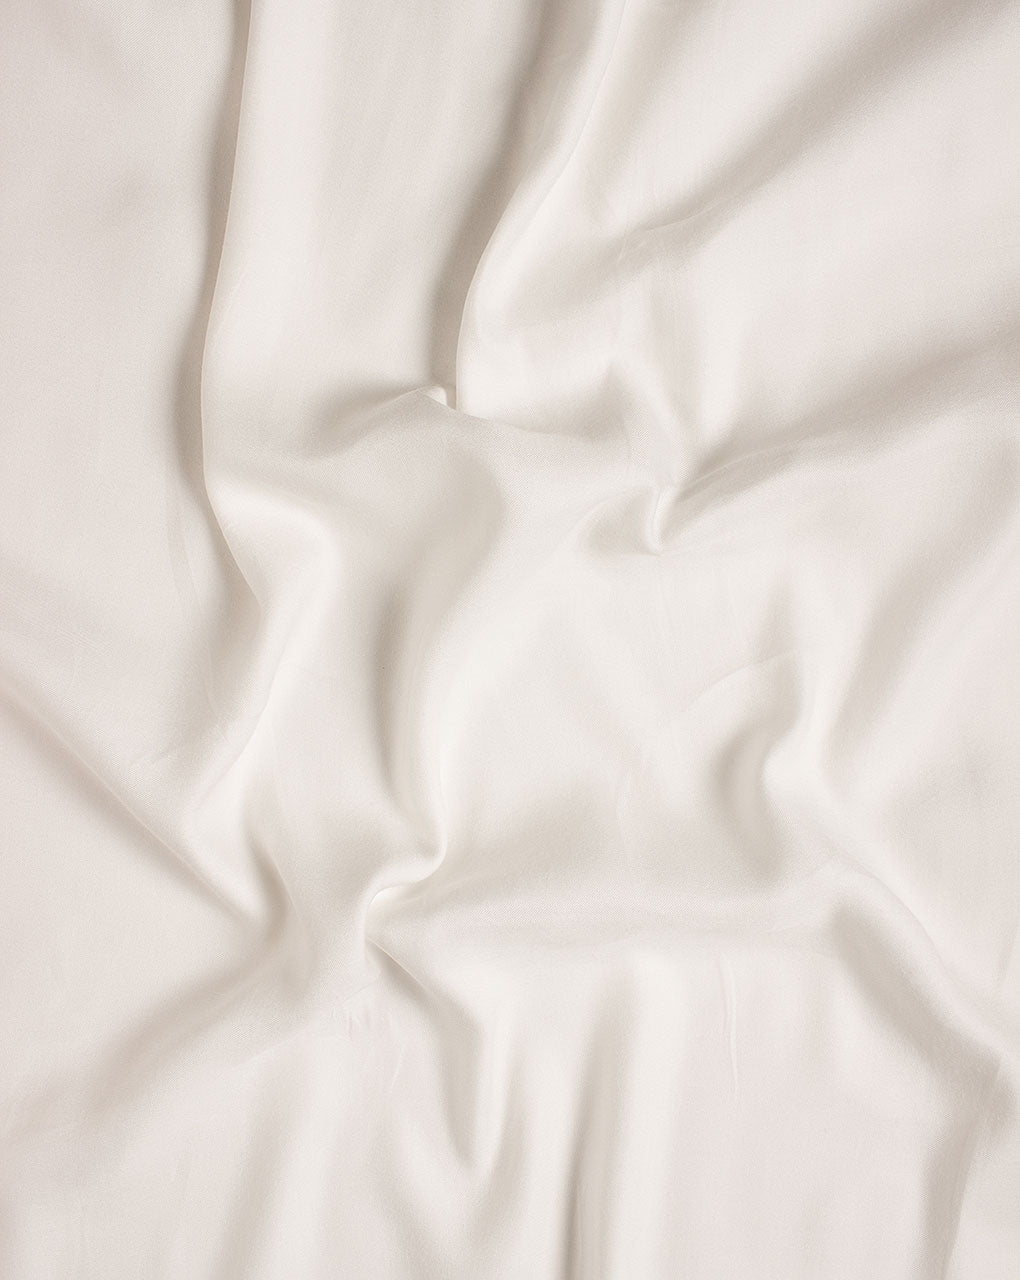 Dyeable Liva Modal ( Touch Fill Satin ) Fabric - Fabriclore.com